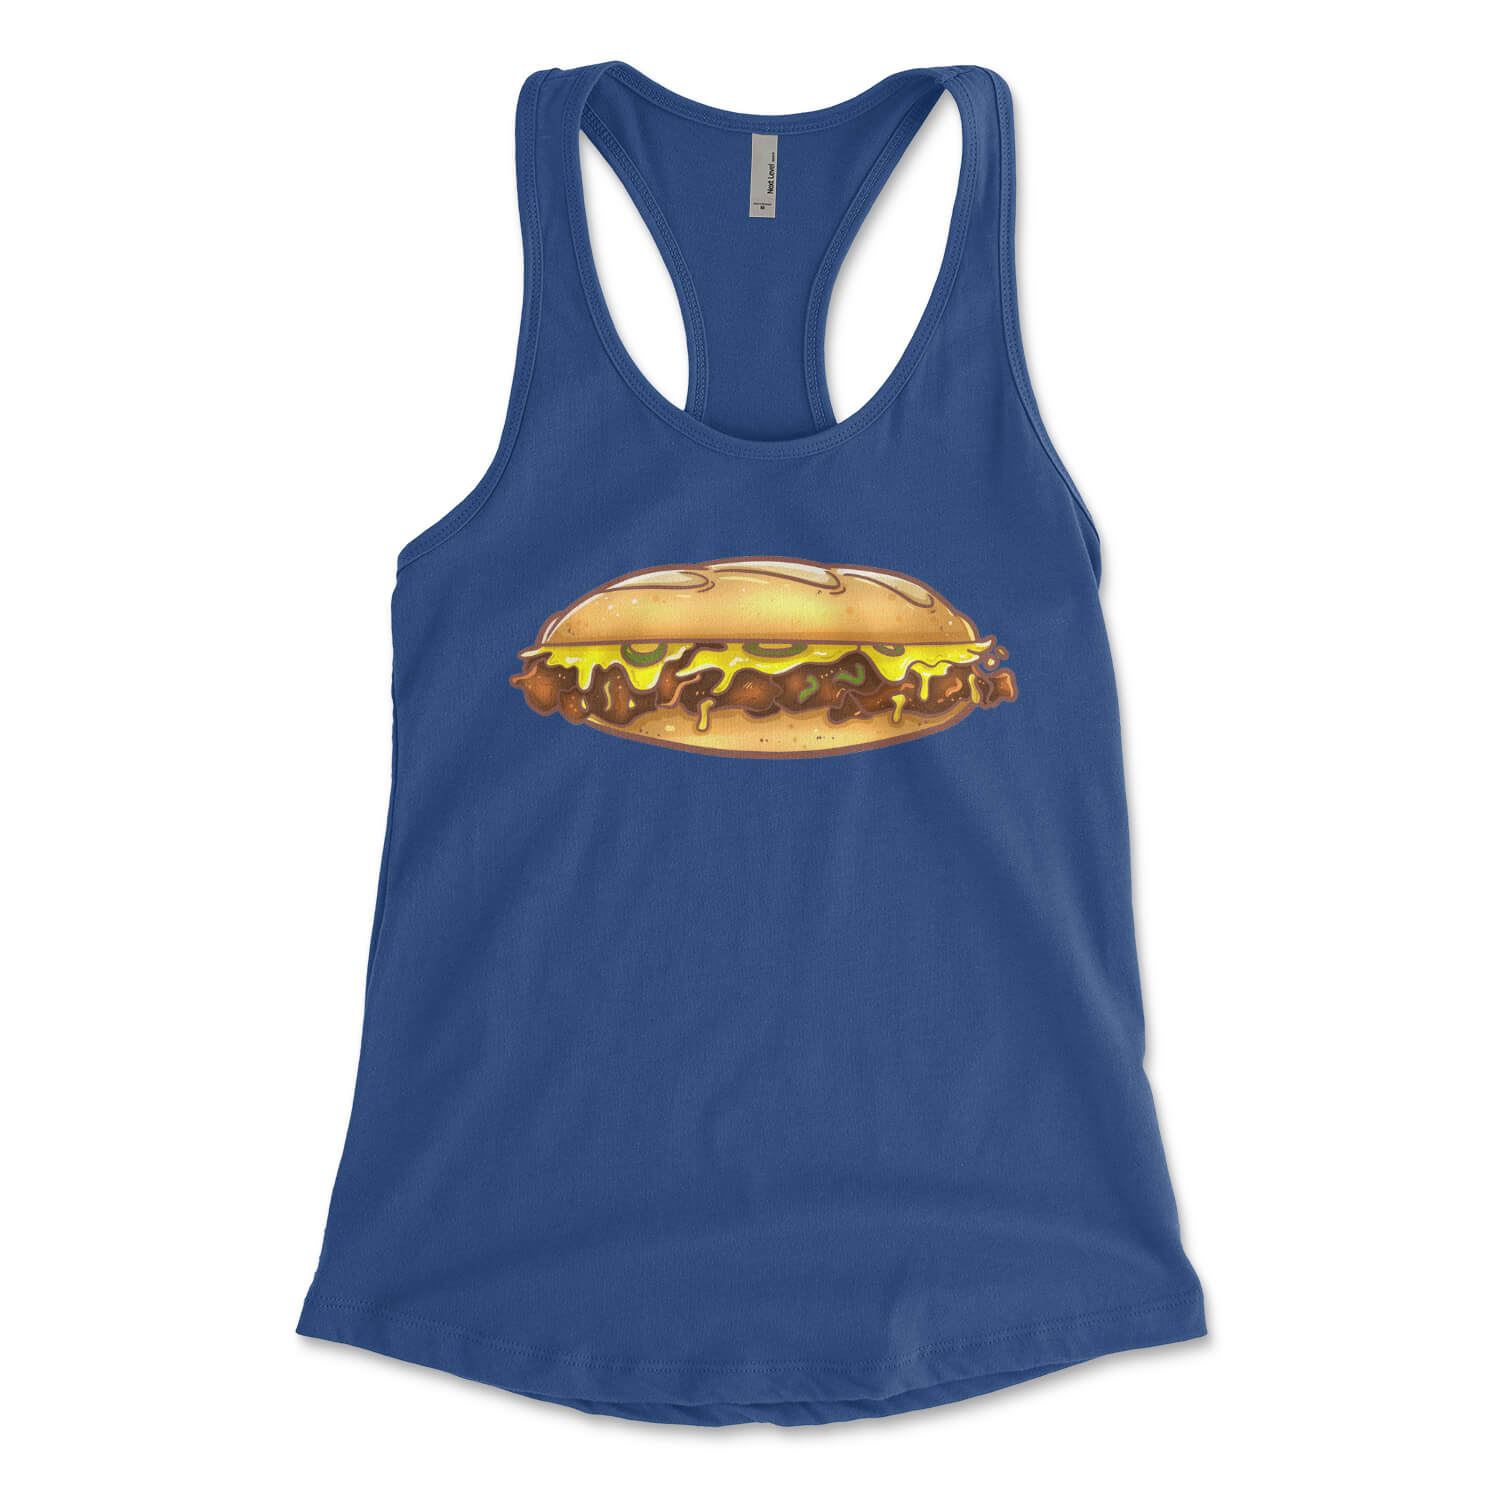 Philly cheesesteak royal blue womens racerback tank top from Phillygoat